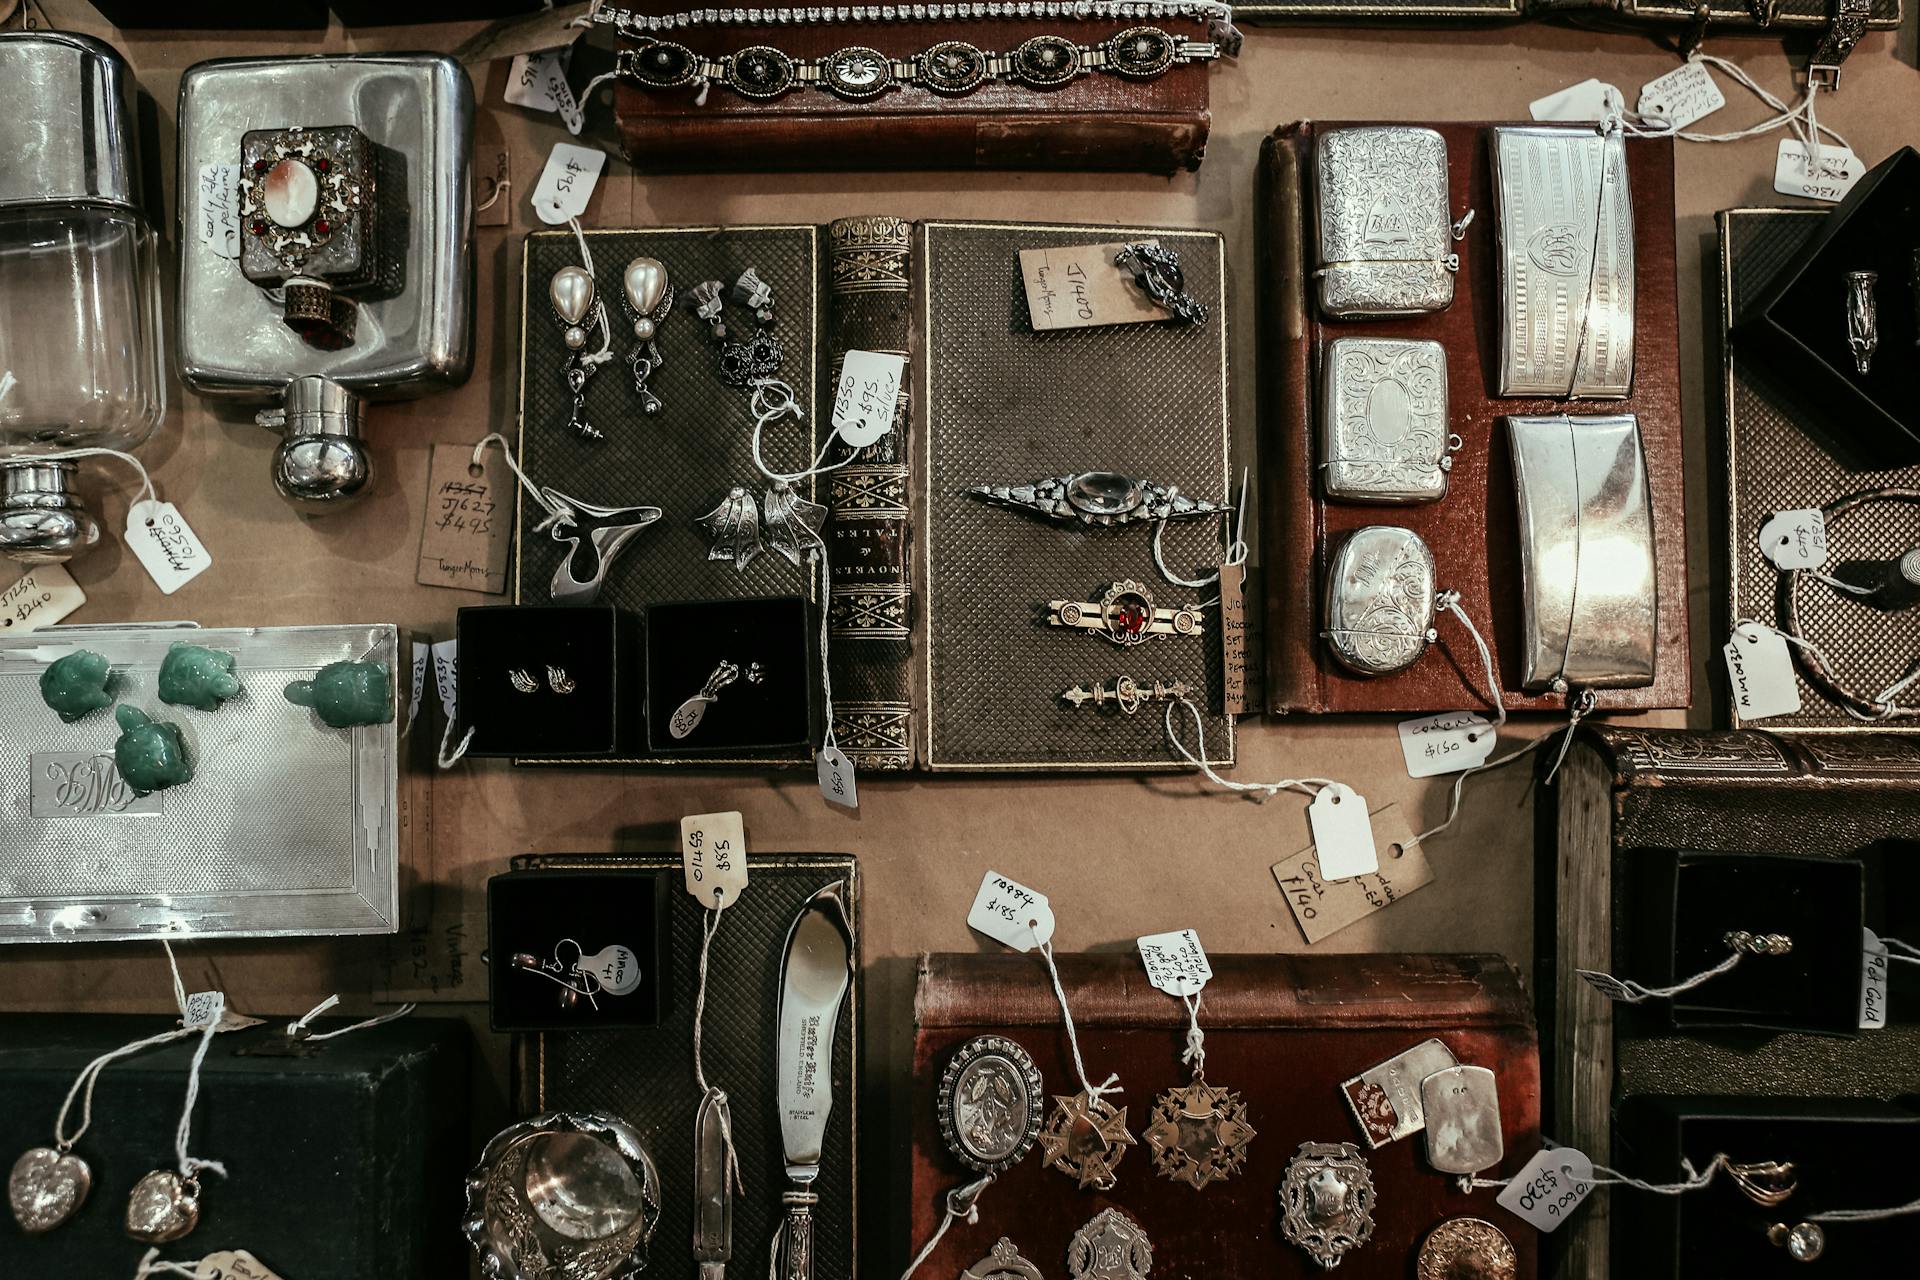 Display in an antique store | Source: Pexels